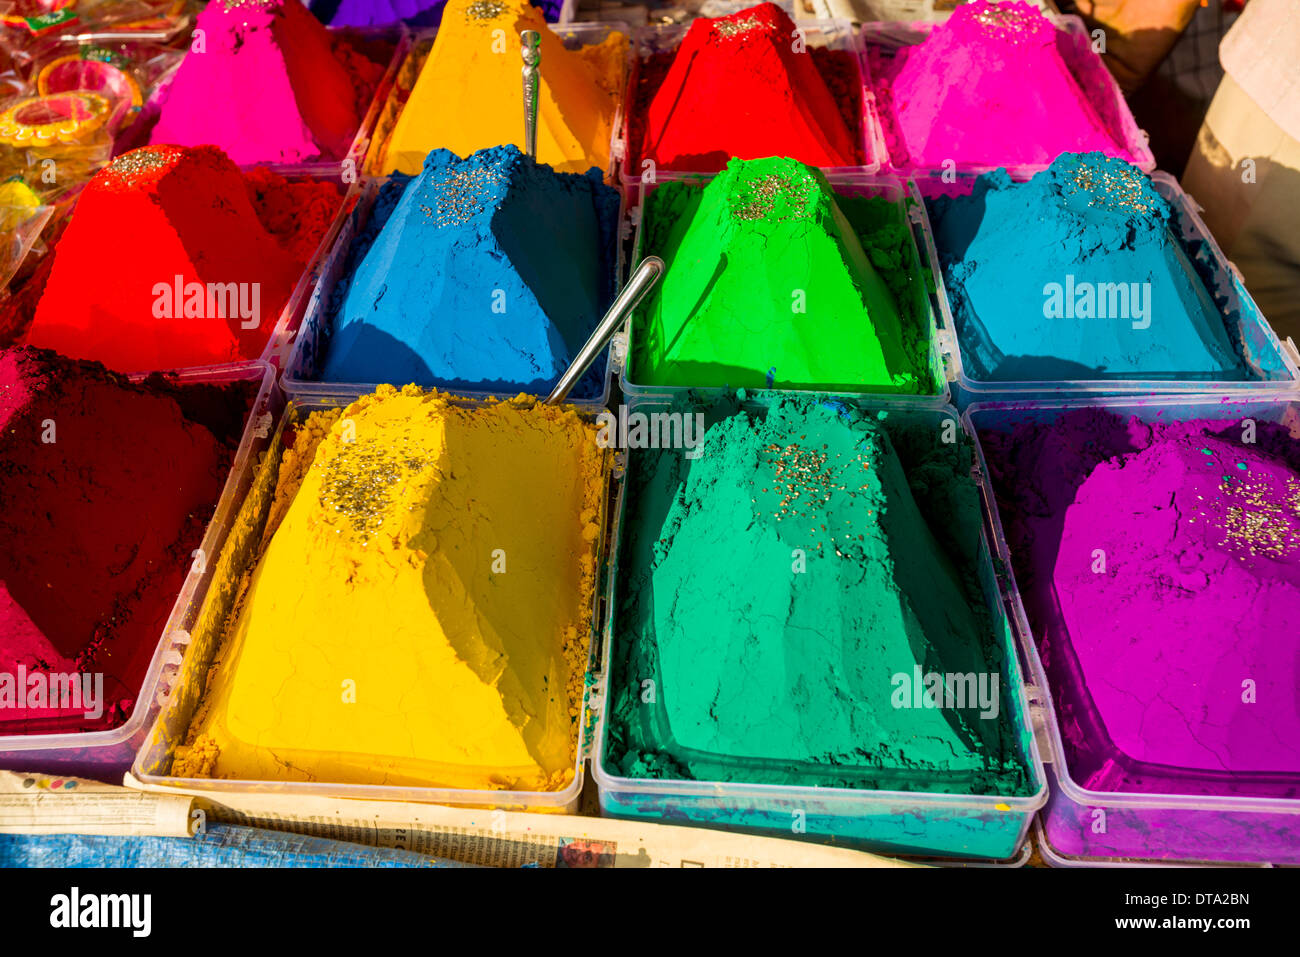 Colour powder in different colors is displayed in heaps for sale, Mumbai, Maharashtra, India Stock Photo